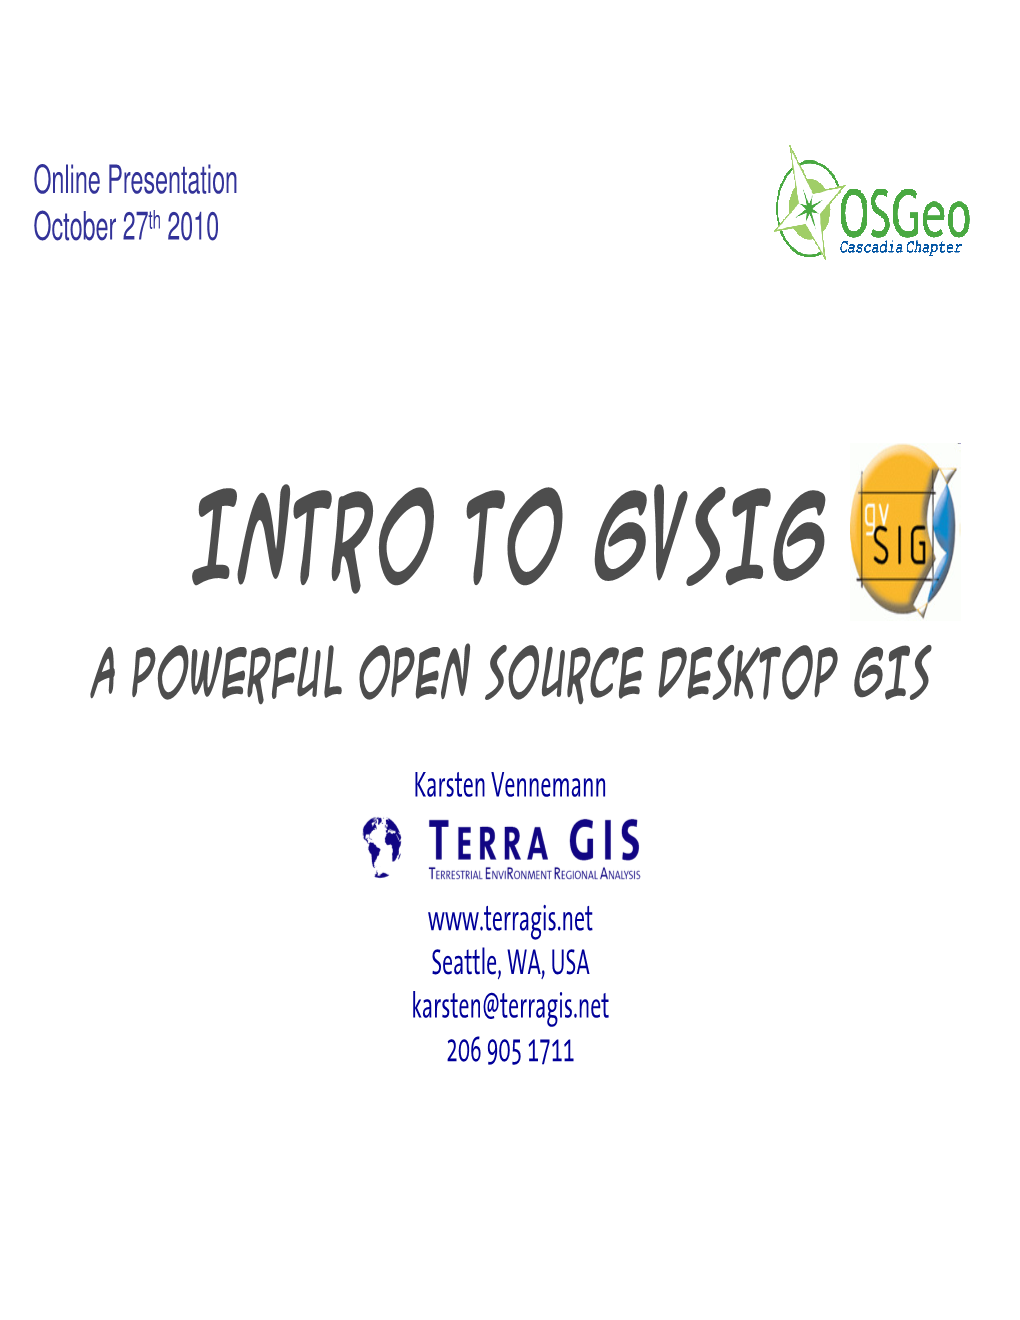 Intro to Gvsig a Powerful Open Source Desktop GIS